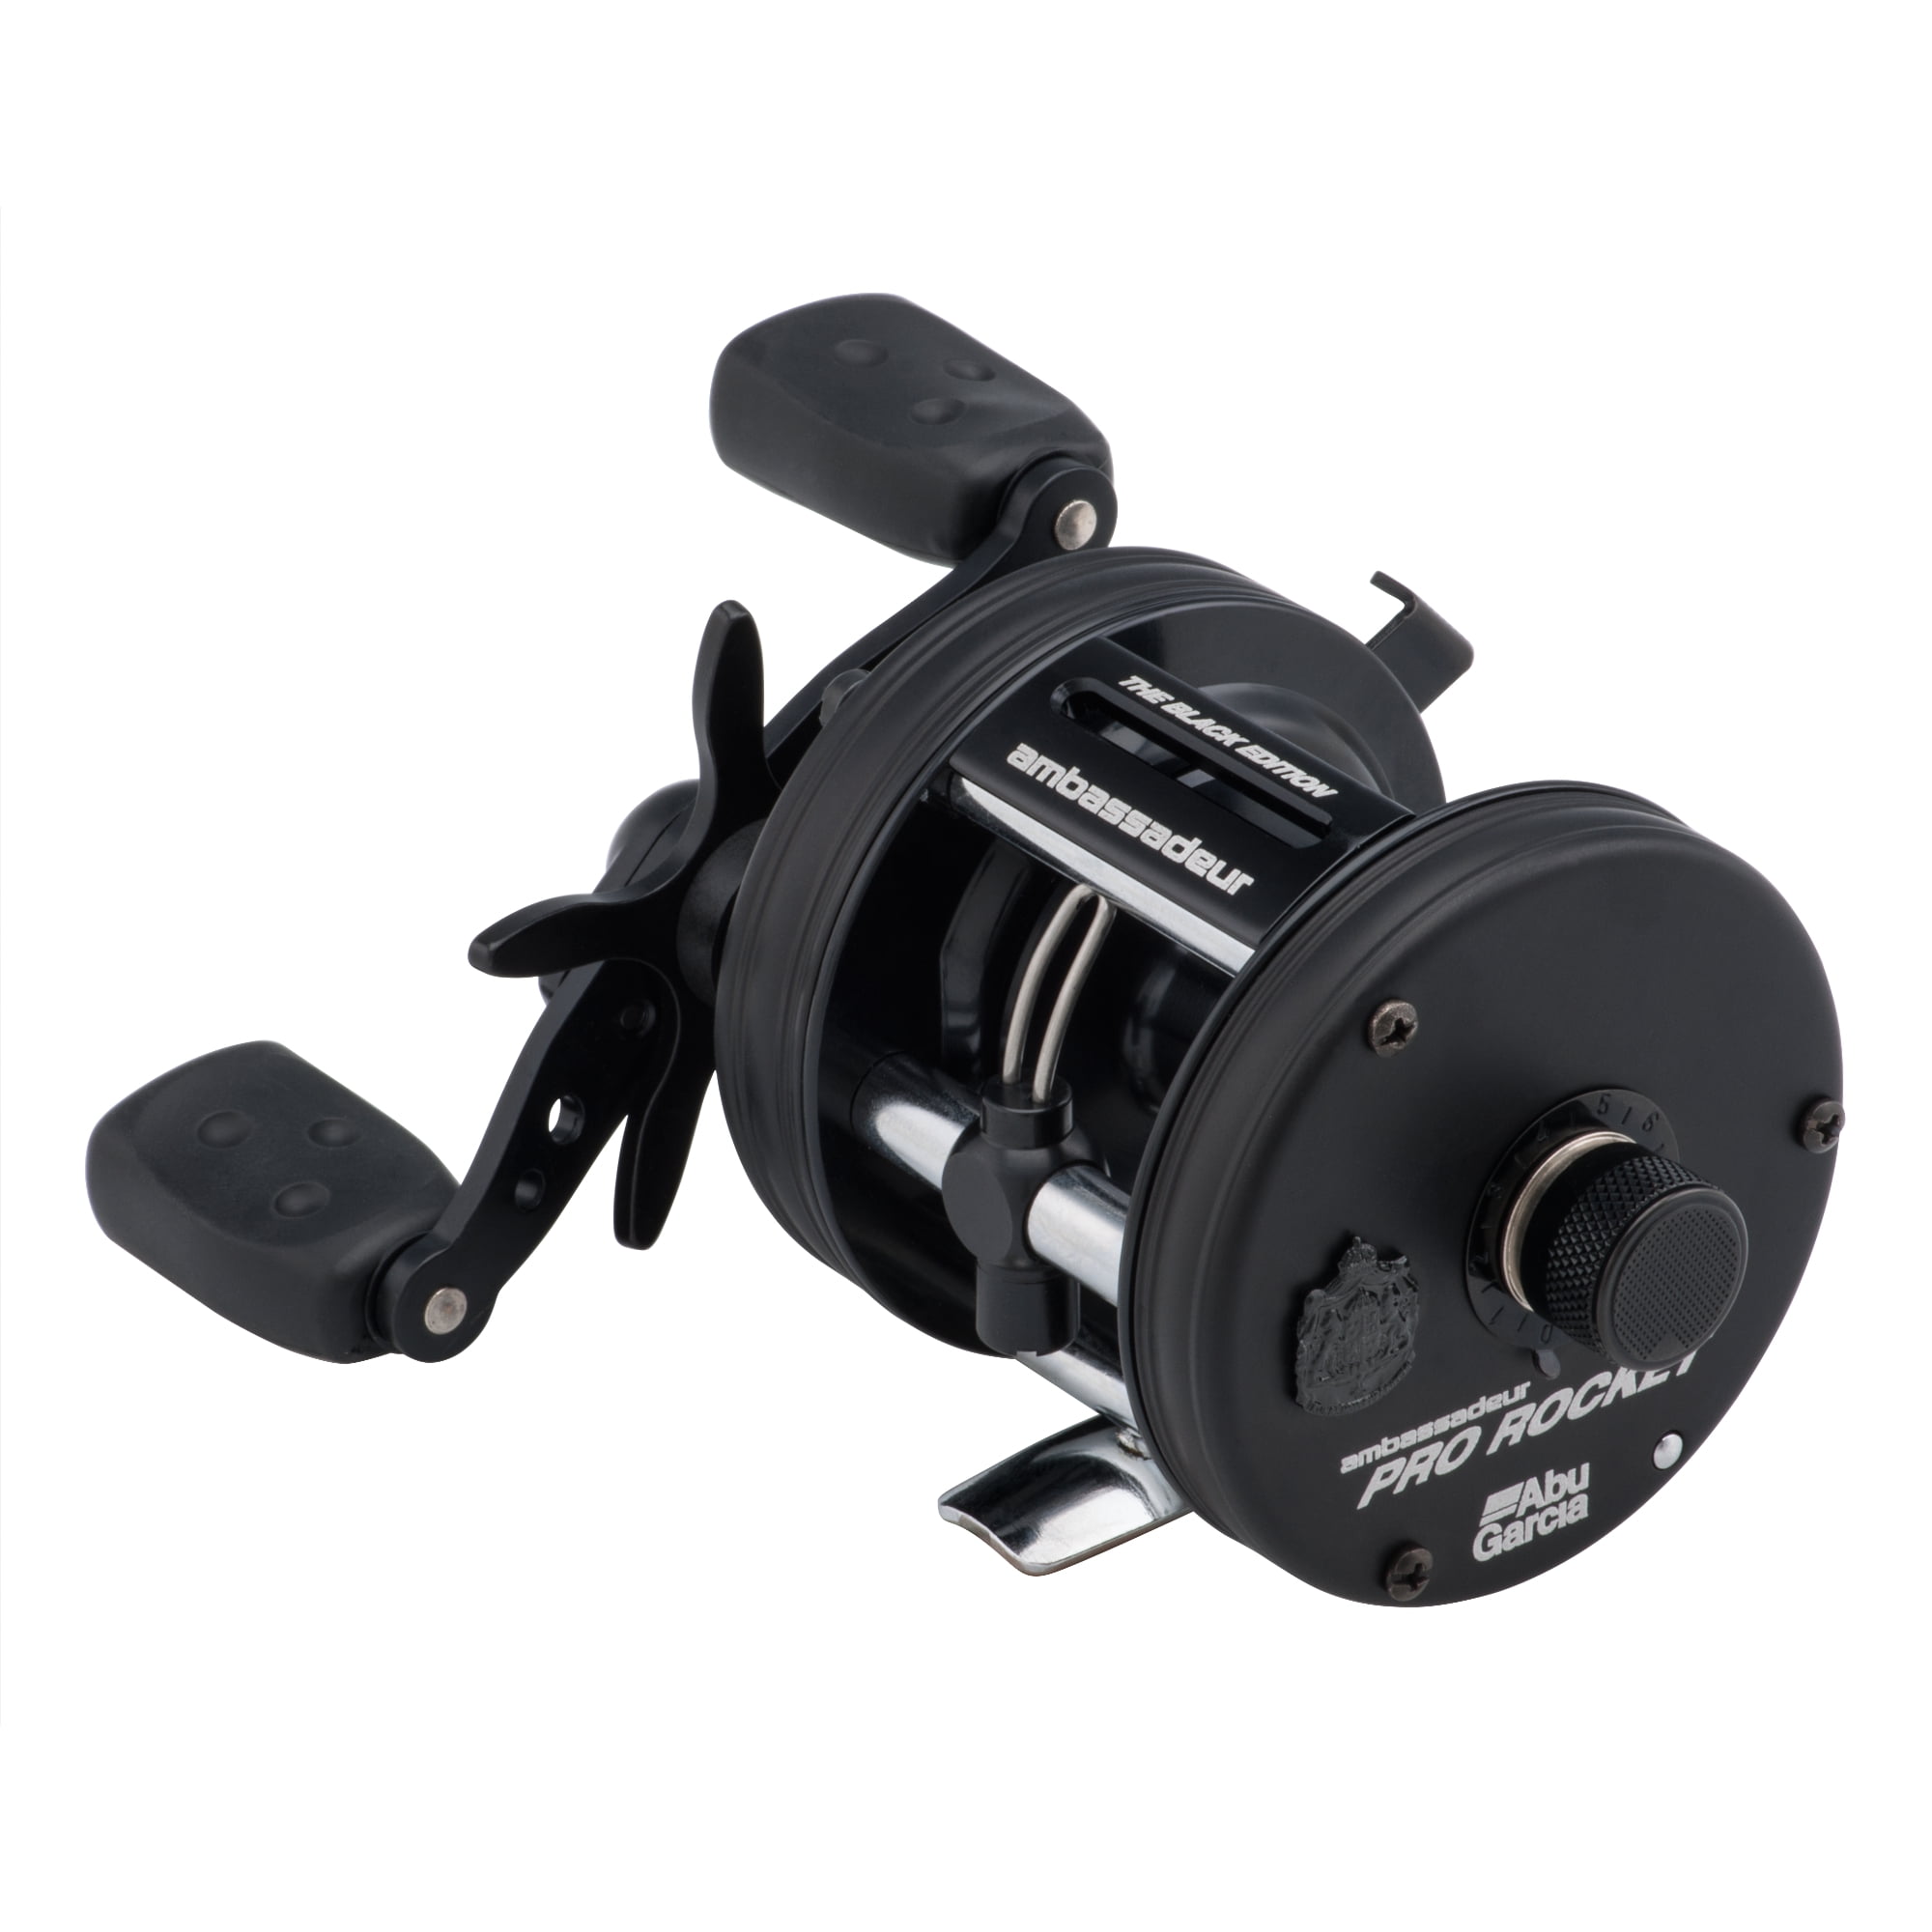 What's the deal with bfs tuned abu garcia ambassadeur reels? : r